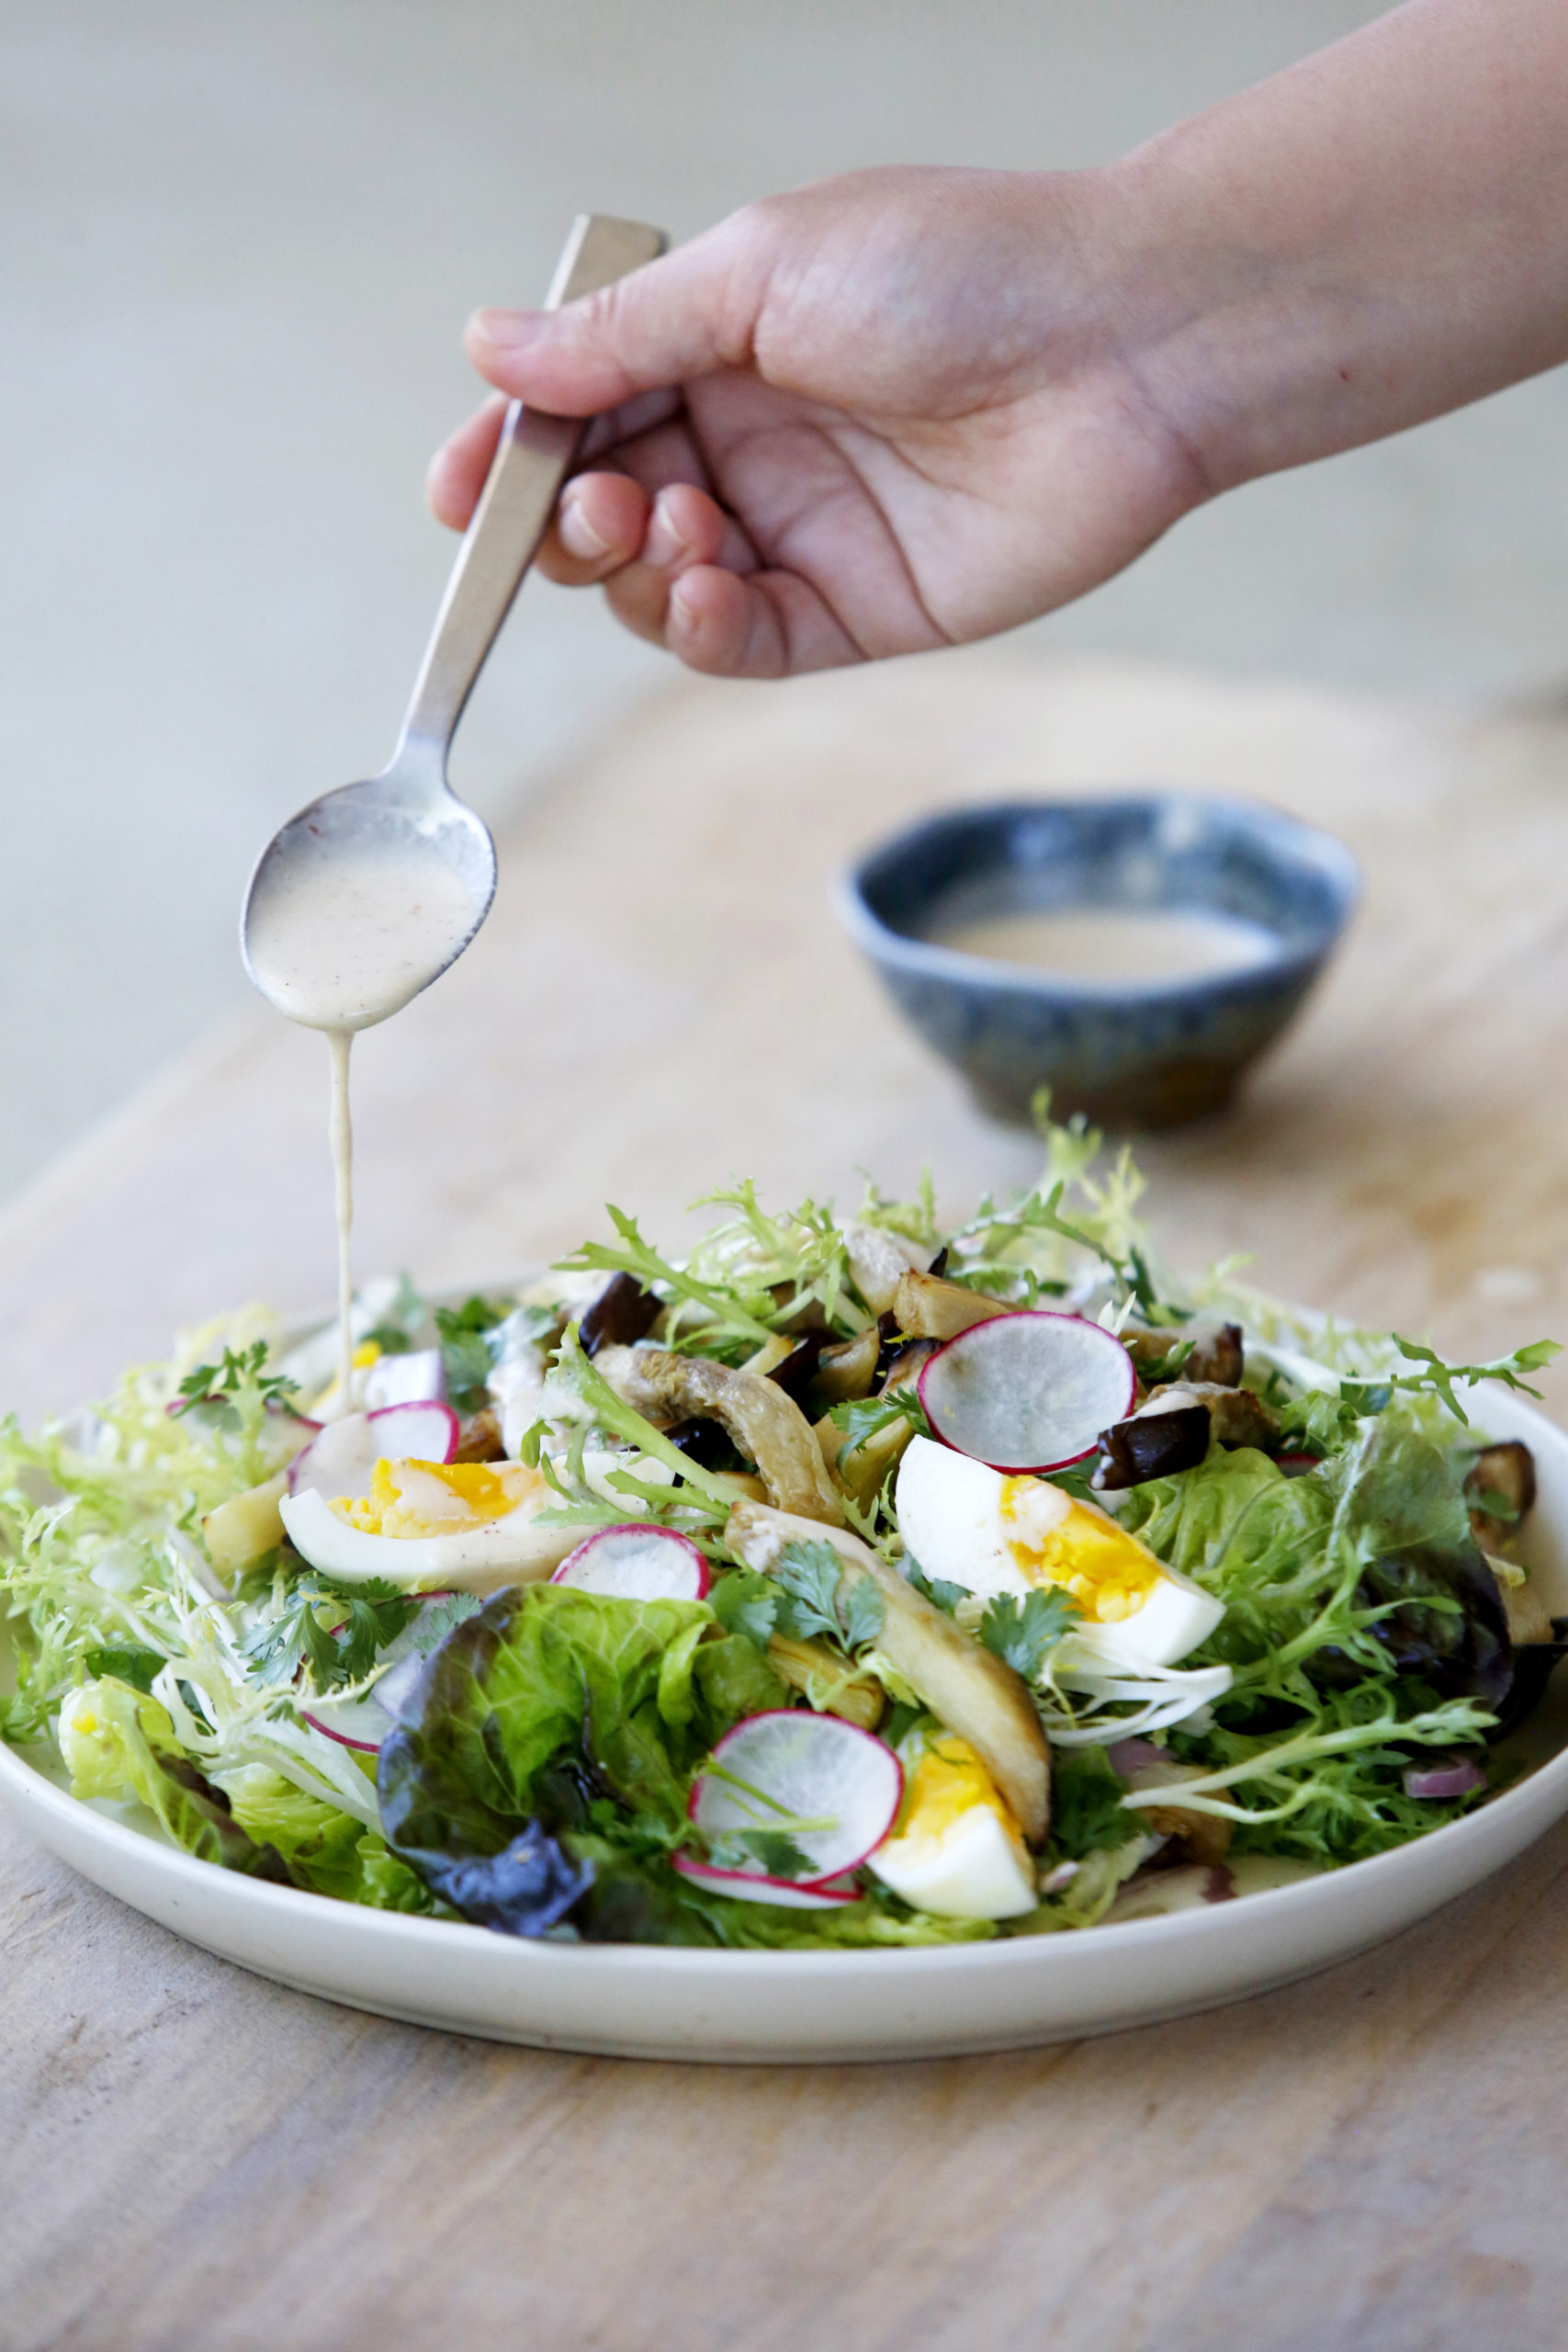 Chef Ploypailin Sakornsin drizzles a a chile-jam coconut milk dressing onto a salad of baked eggplant, soft boiled eggs, radishes, and shallots, atop a bed of little gem and frisee greens in Healdsburg, Calif., on Tuesday, July 6, 2021.(Beth Schlanker/The Press Democrat)